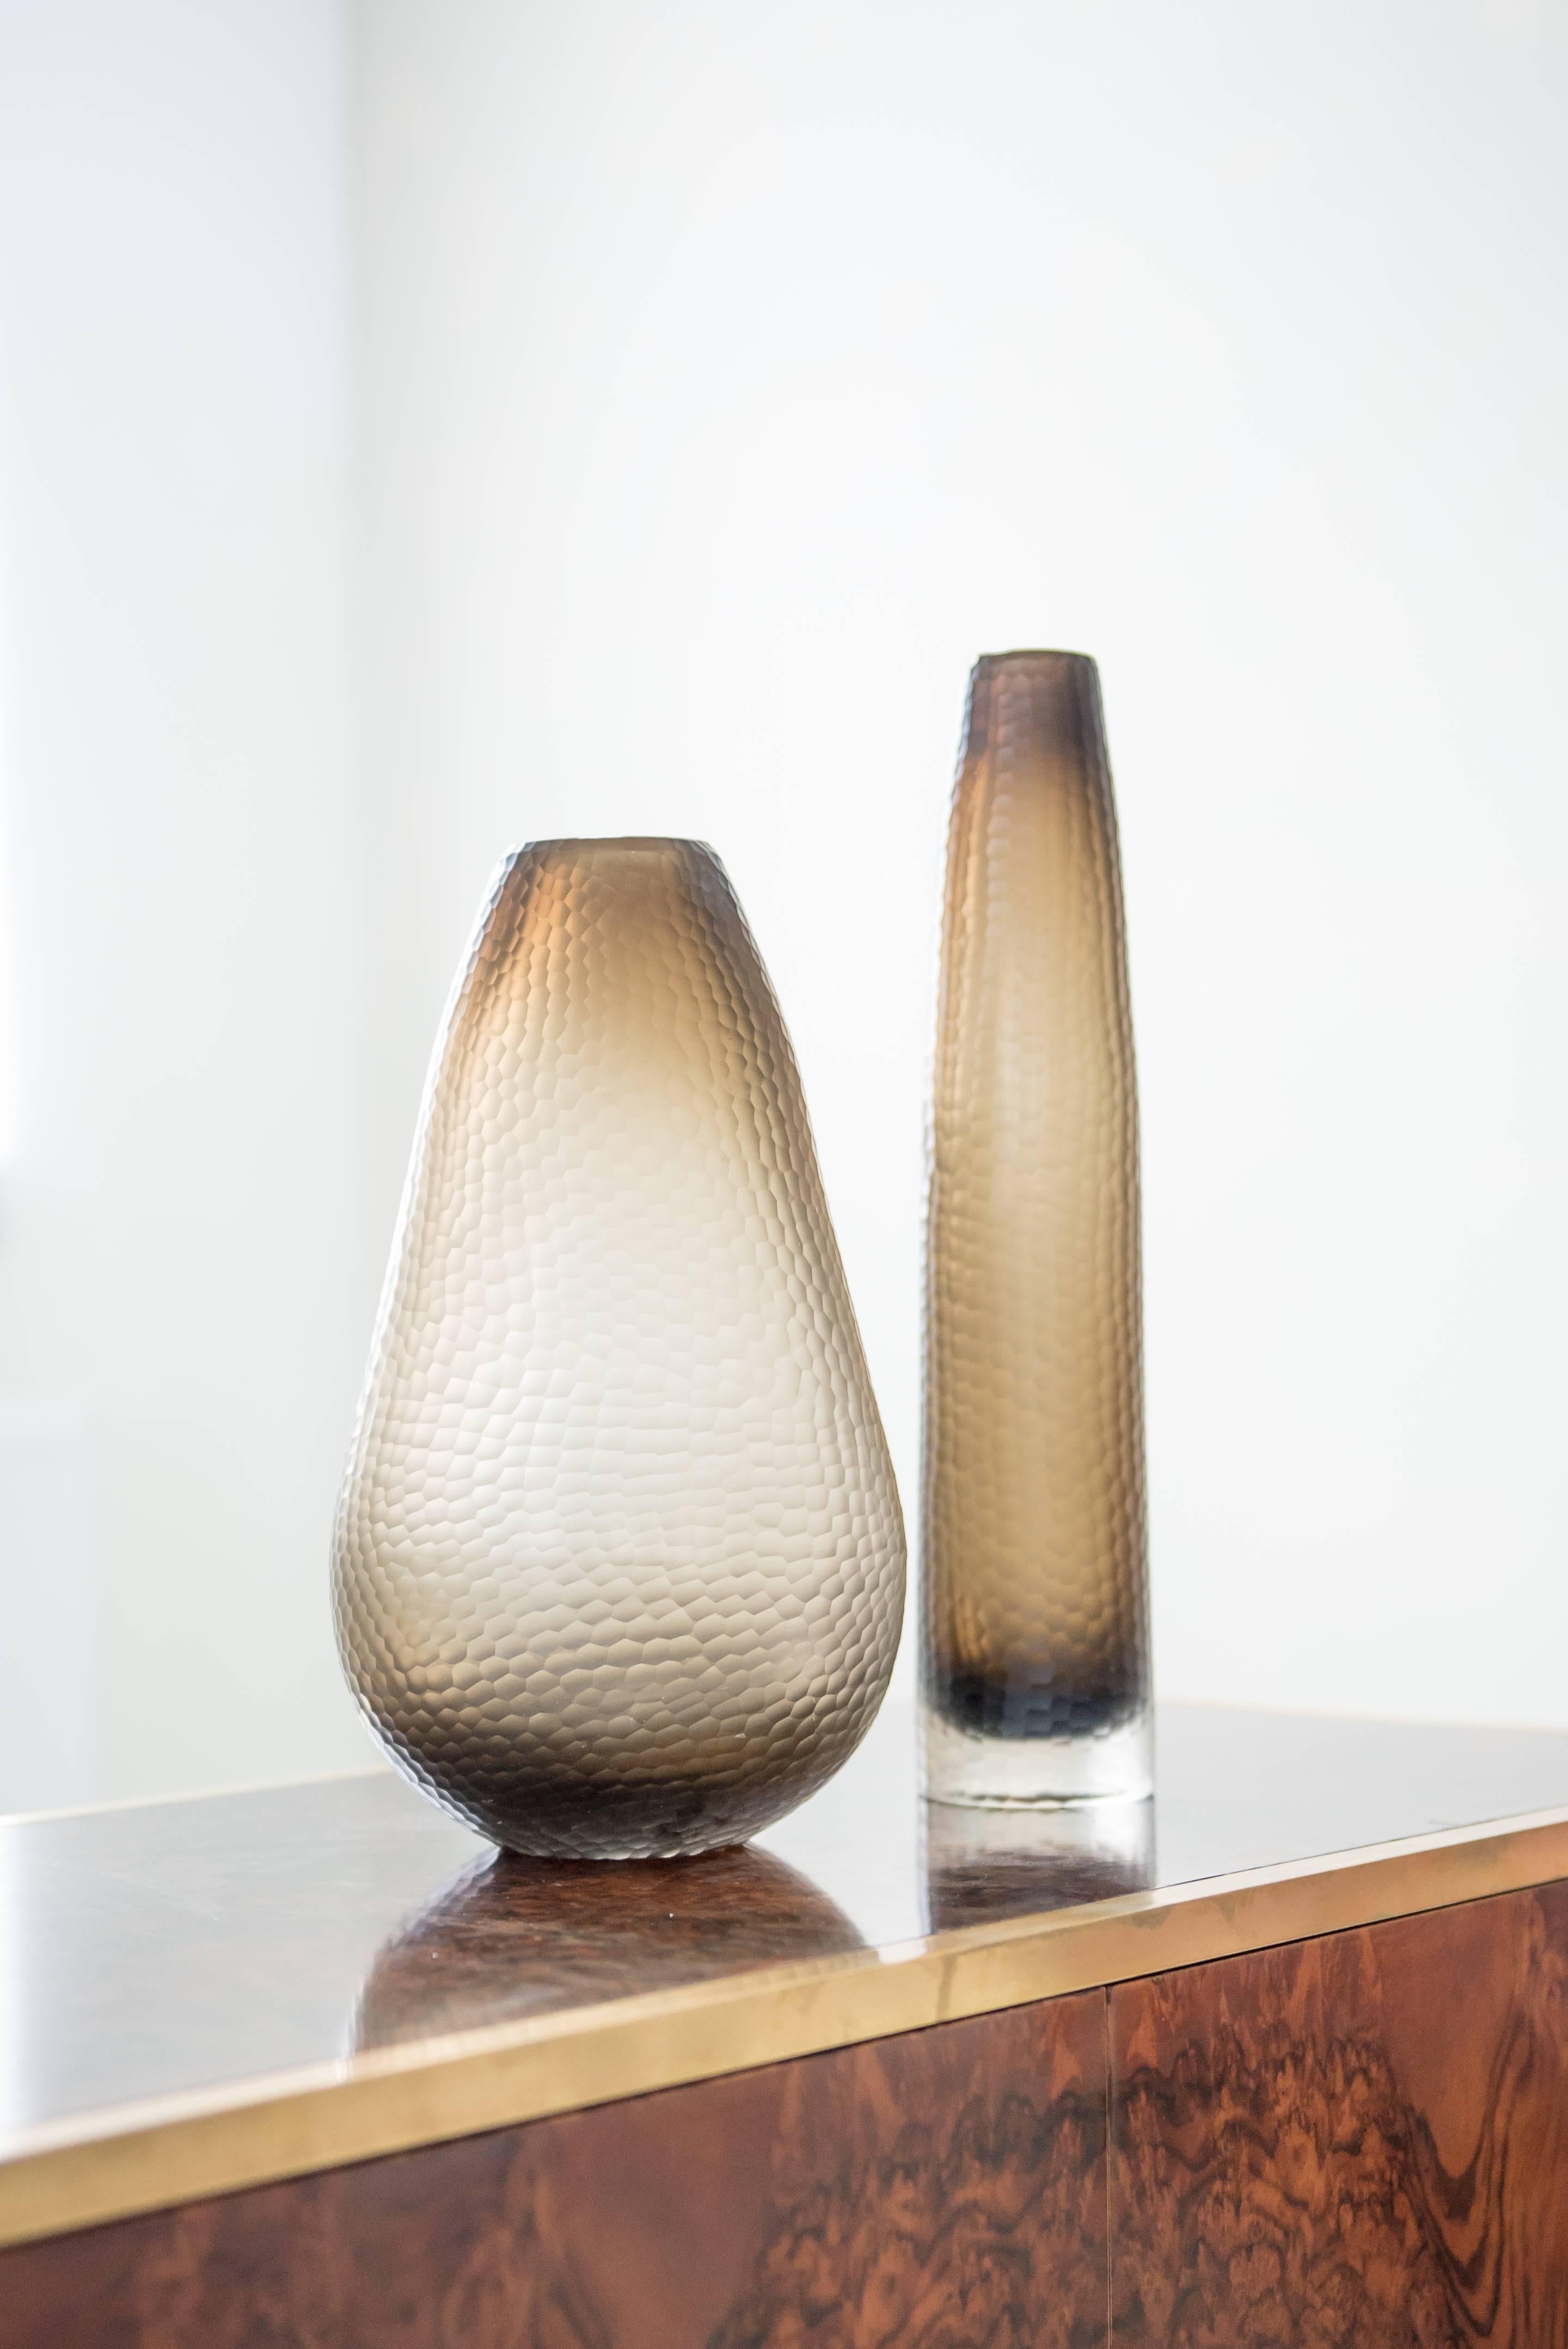 Two vases in battuto technique. A technique that was invented by Carlo Scarpa in 1940 for Venini, intending the surface to resemble beaten silver or of worked stone.
The grey brown hues are very soft and change in the light.

Wide vase: 34 cm x 20